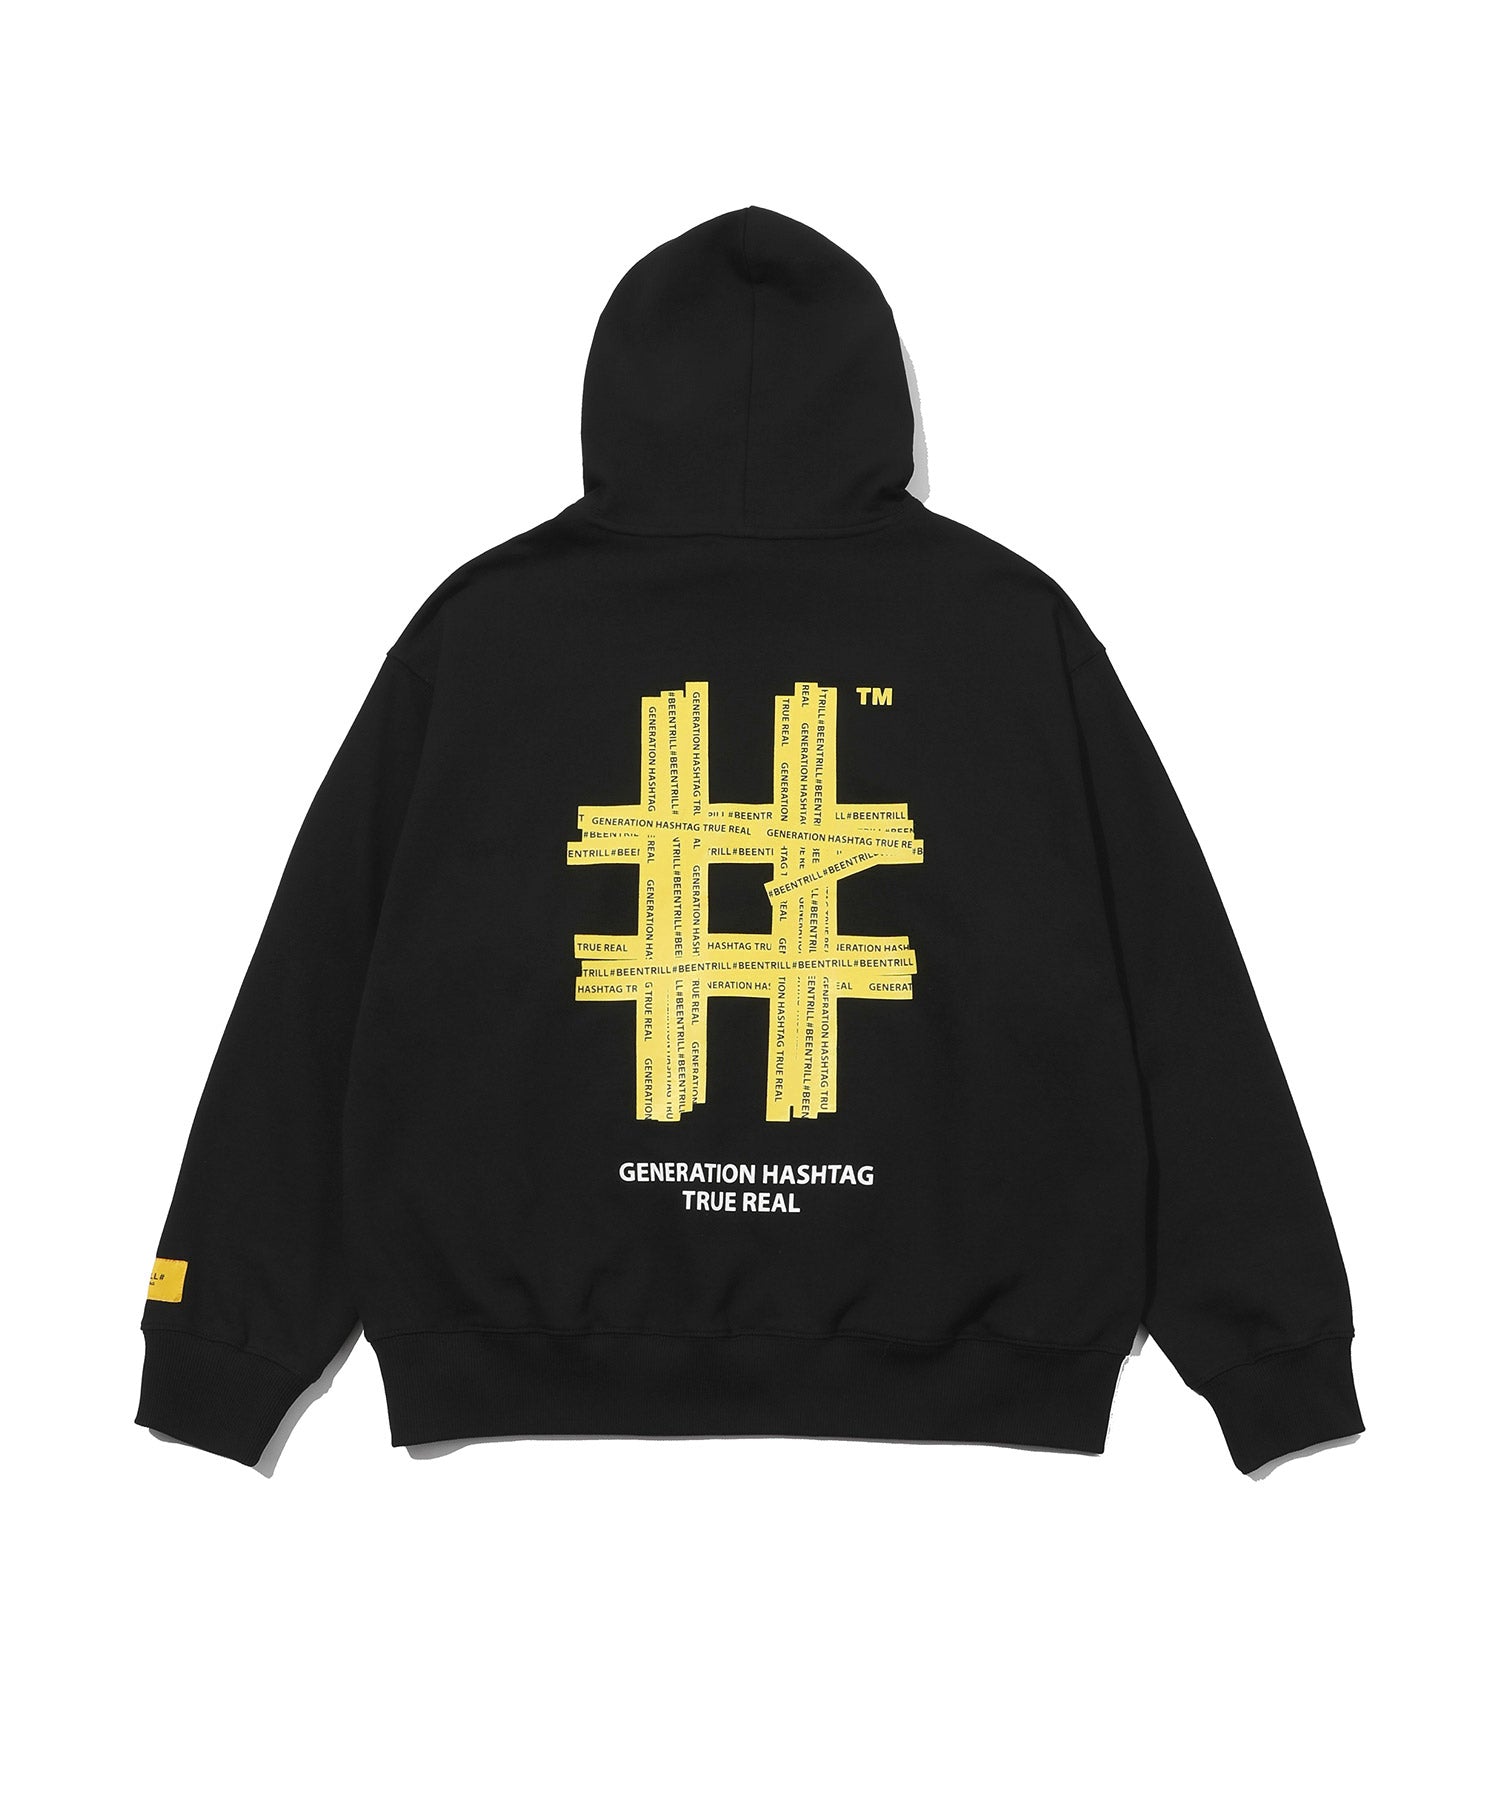 BEENTRILL Yellow Taping Hashtag Overfit Hoodie Black